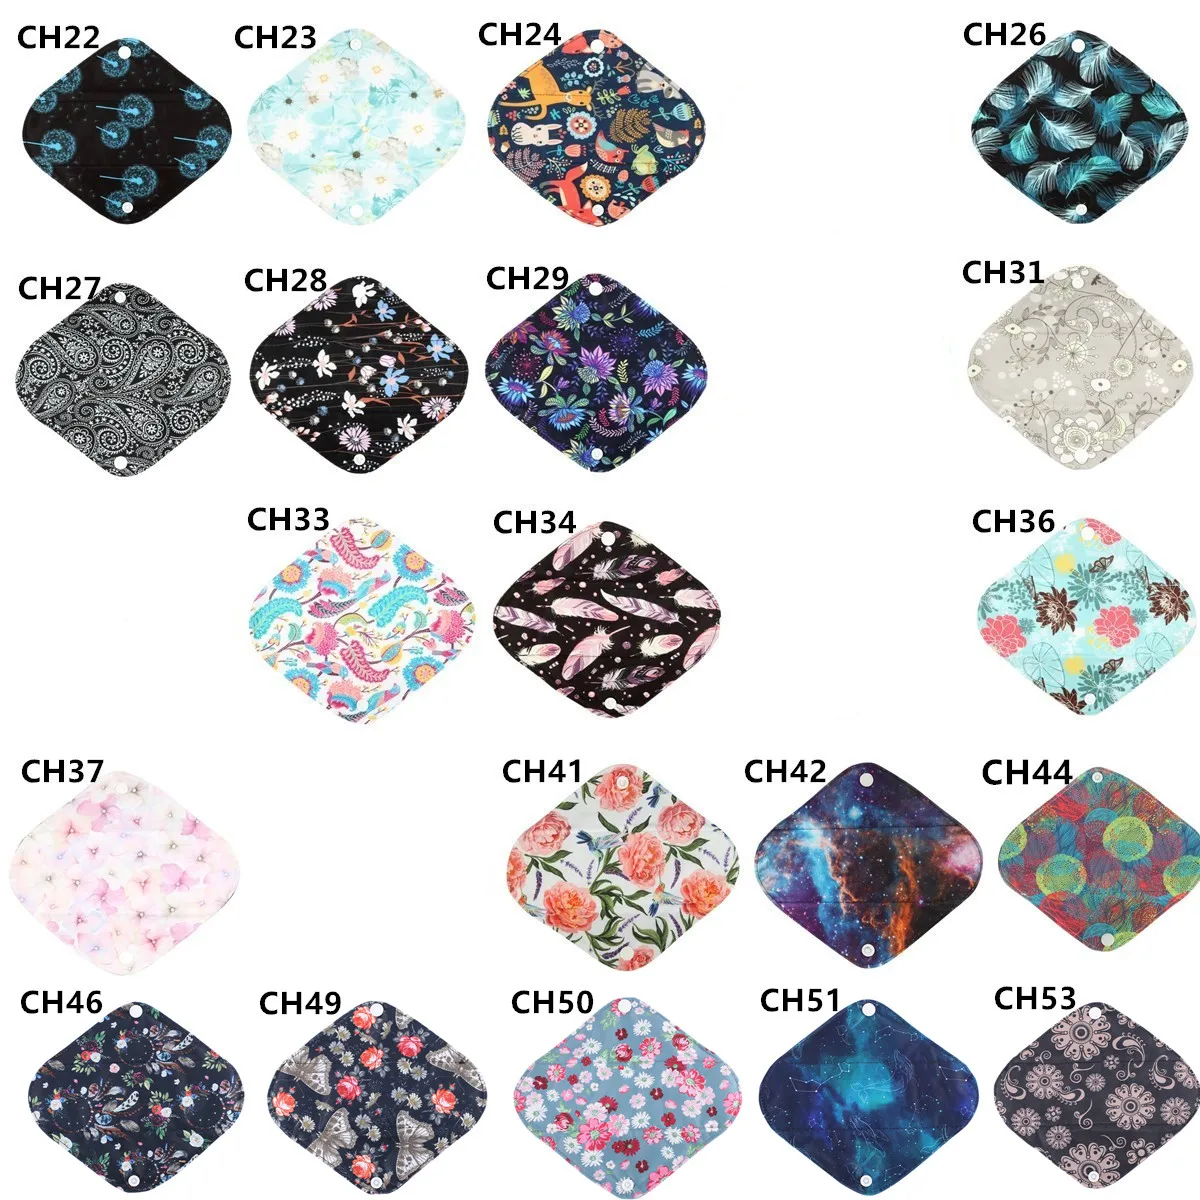 You Choose 2 Bags From 14 Designs and Send Message to Me 2 Pieces Mini Wet Bag Reusable for Mama Cloth Menstrual Pads Breast Pads 